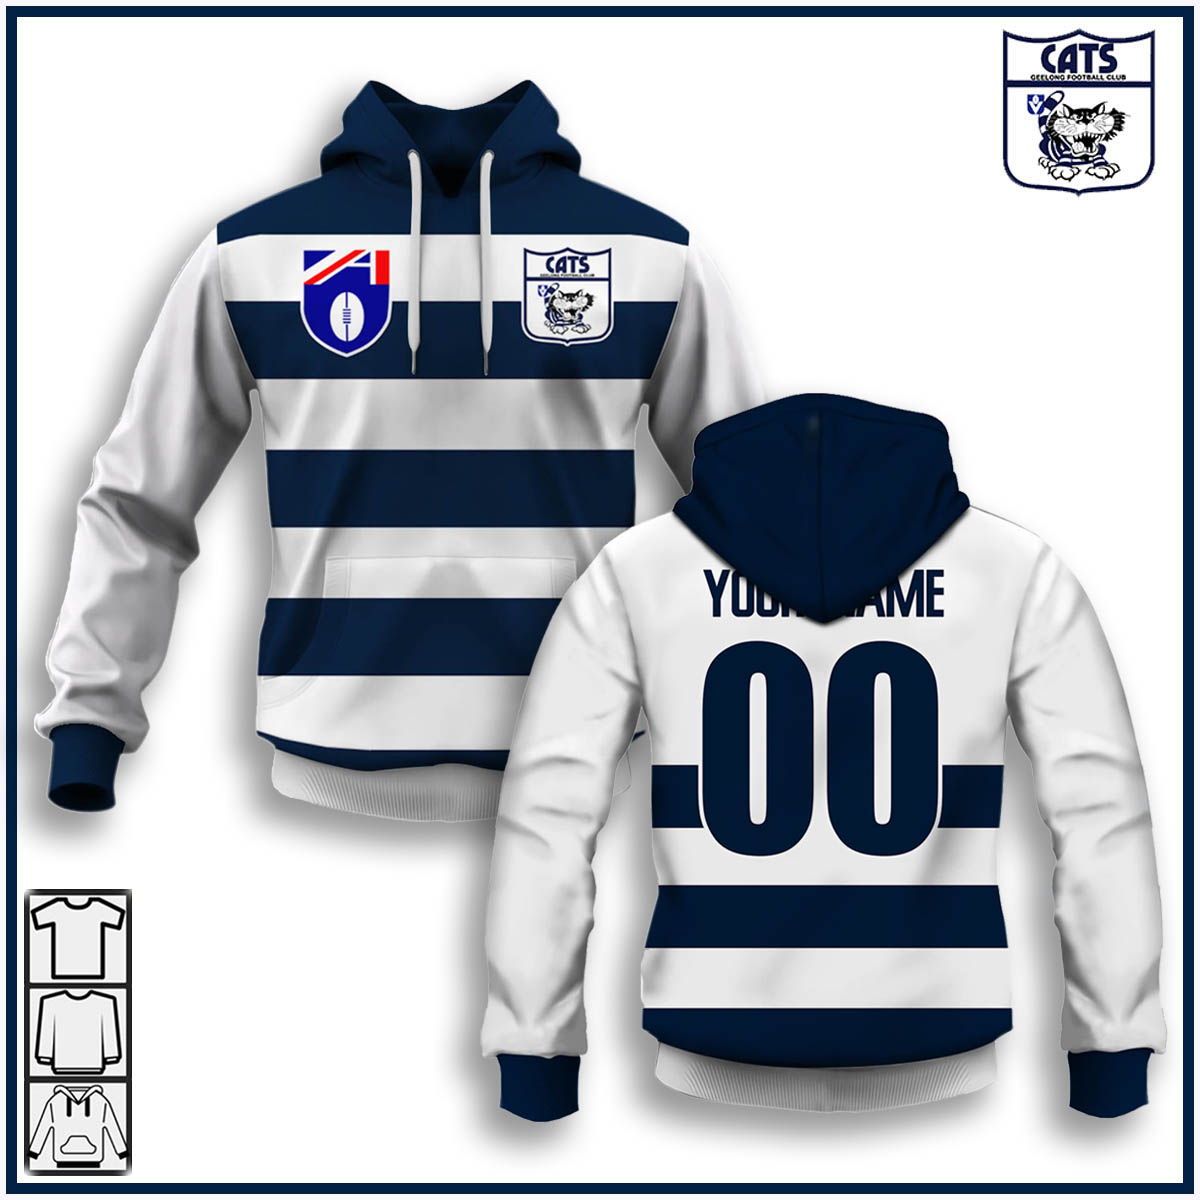 Personalized Geelong Cats Football Club Vintage Retro AFL Guernsey 90s